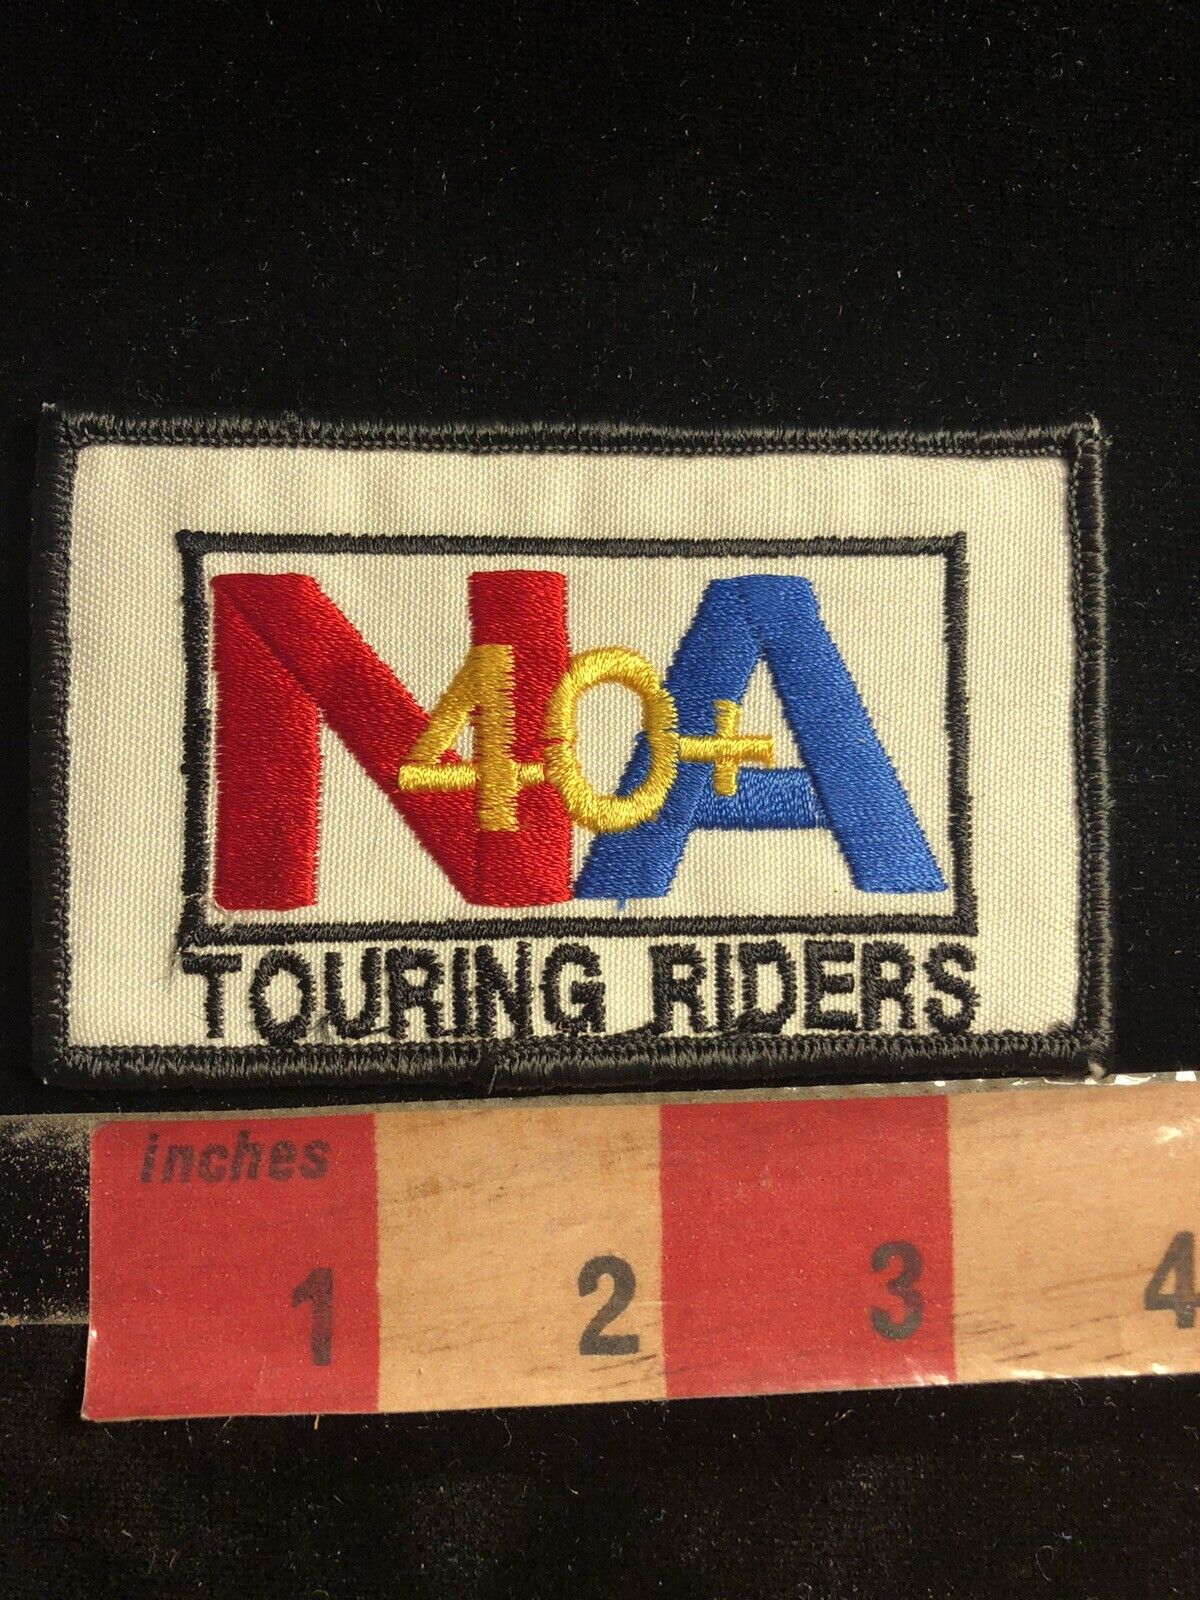 NA 40+ NORTH AMERICAN 40+ TOURING RIDERS Motorcycle Biker Patch C01U